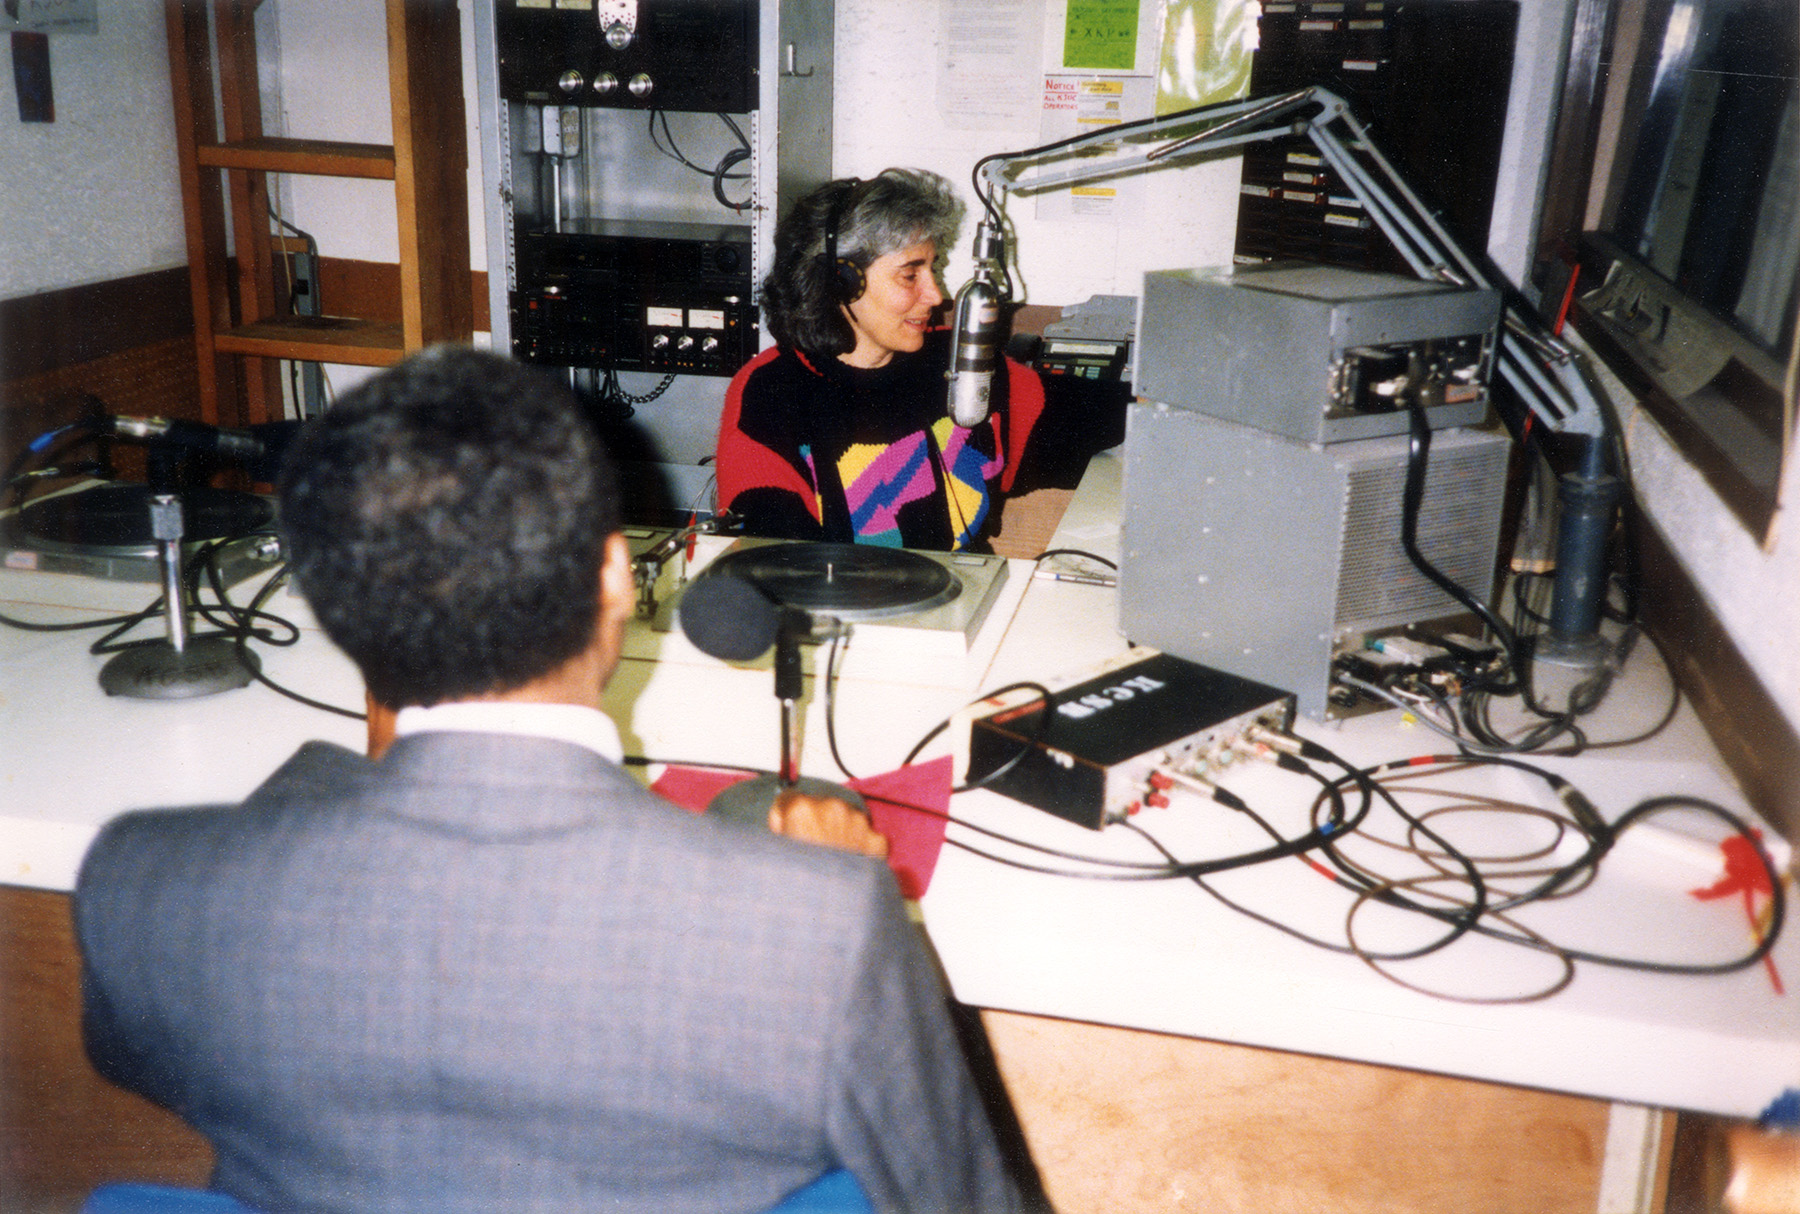 Elizabeth Robinson interviews a guest from Latin America on Third World News Review in the KCSB-FM Radio studio at UCSB, mid- to late 1990s.